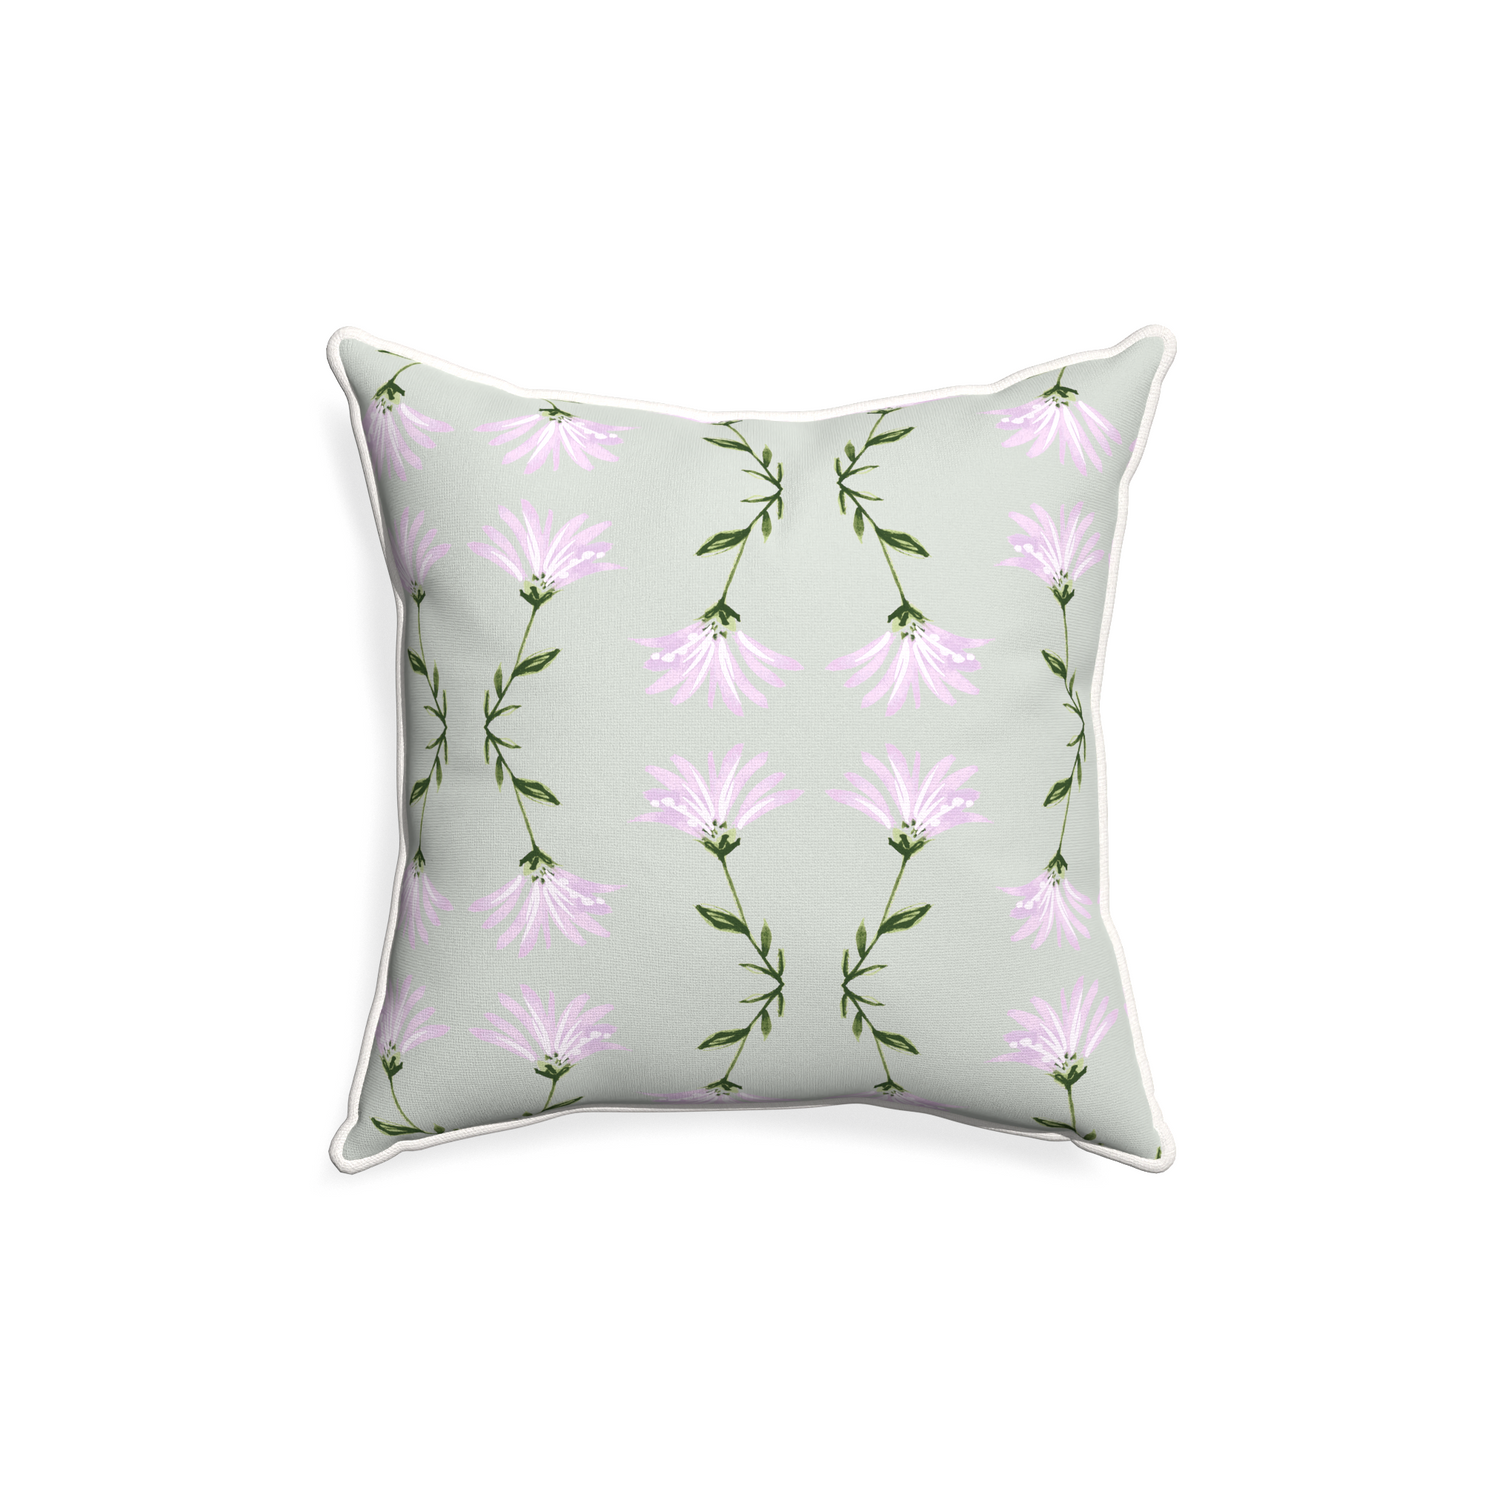 18-square marina sage custom pillow with snow piping on white background